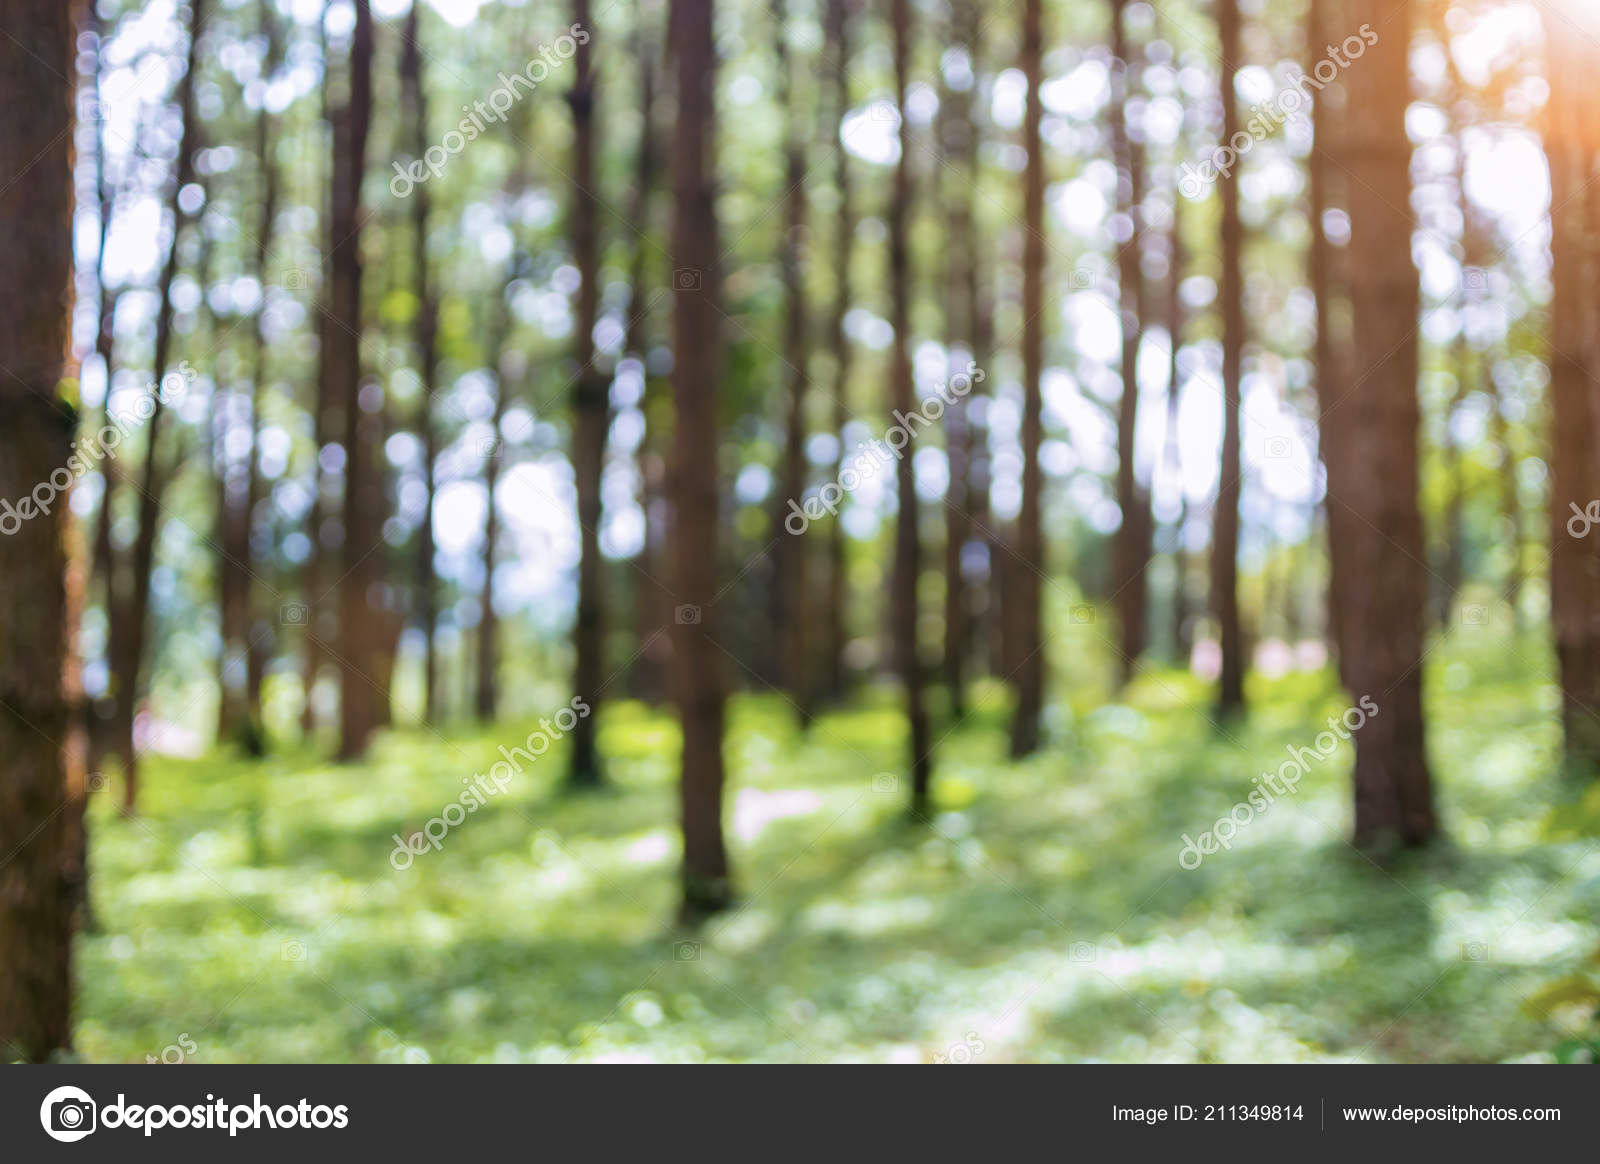 Blurred Background Image Pine Trees Forest Select Blur Focus Stock Photo by  ©nirutdps 211349814